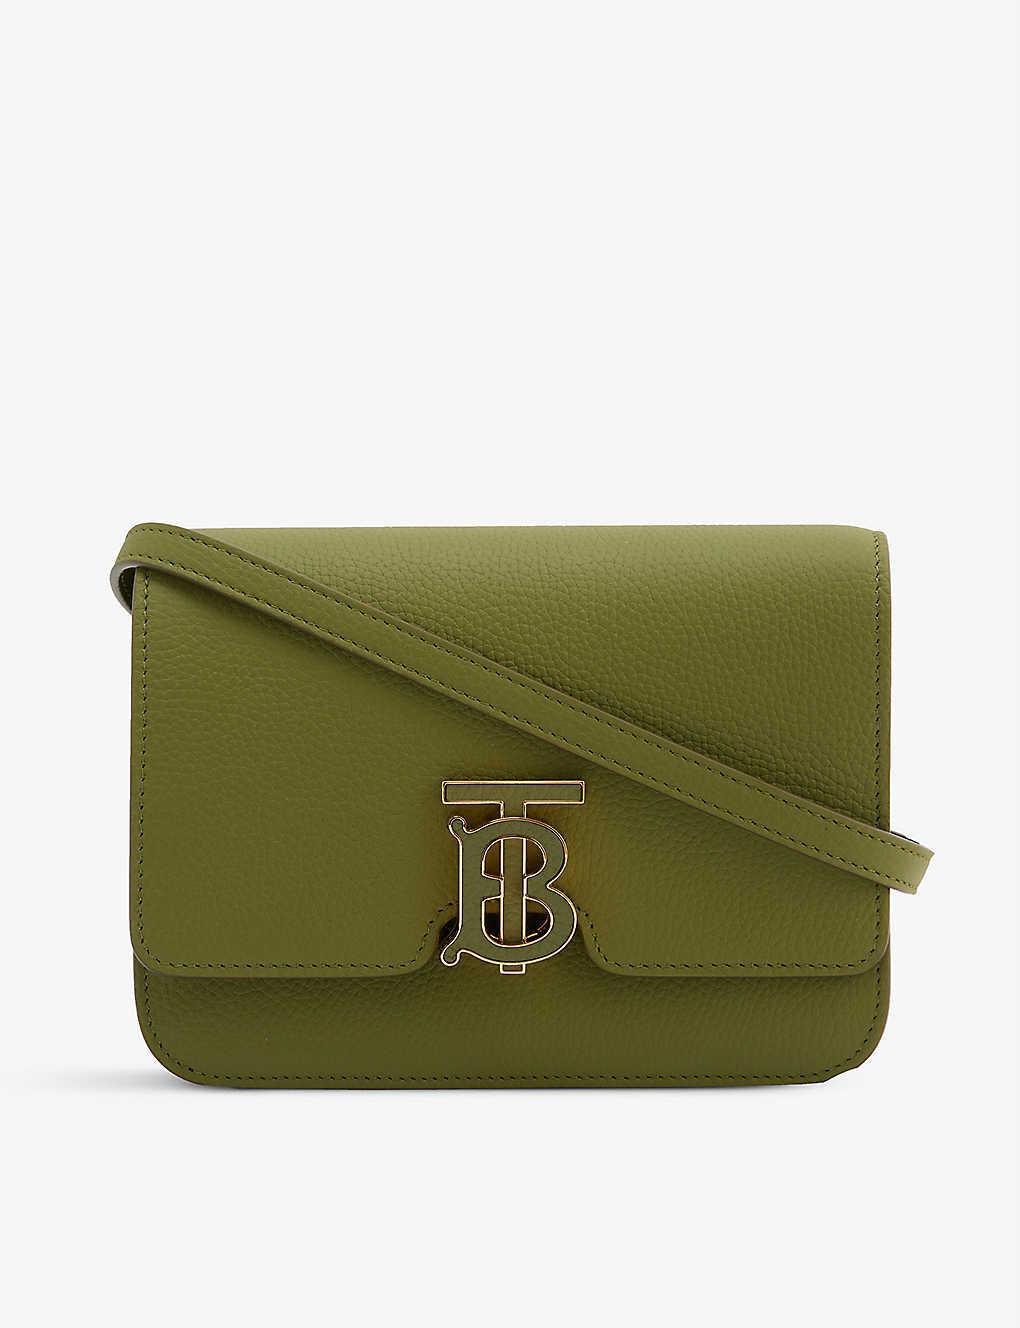 Burberry Small Canvas And Leather Tb Cross-body Bag in Natural